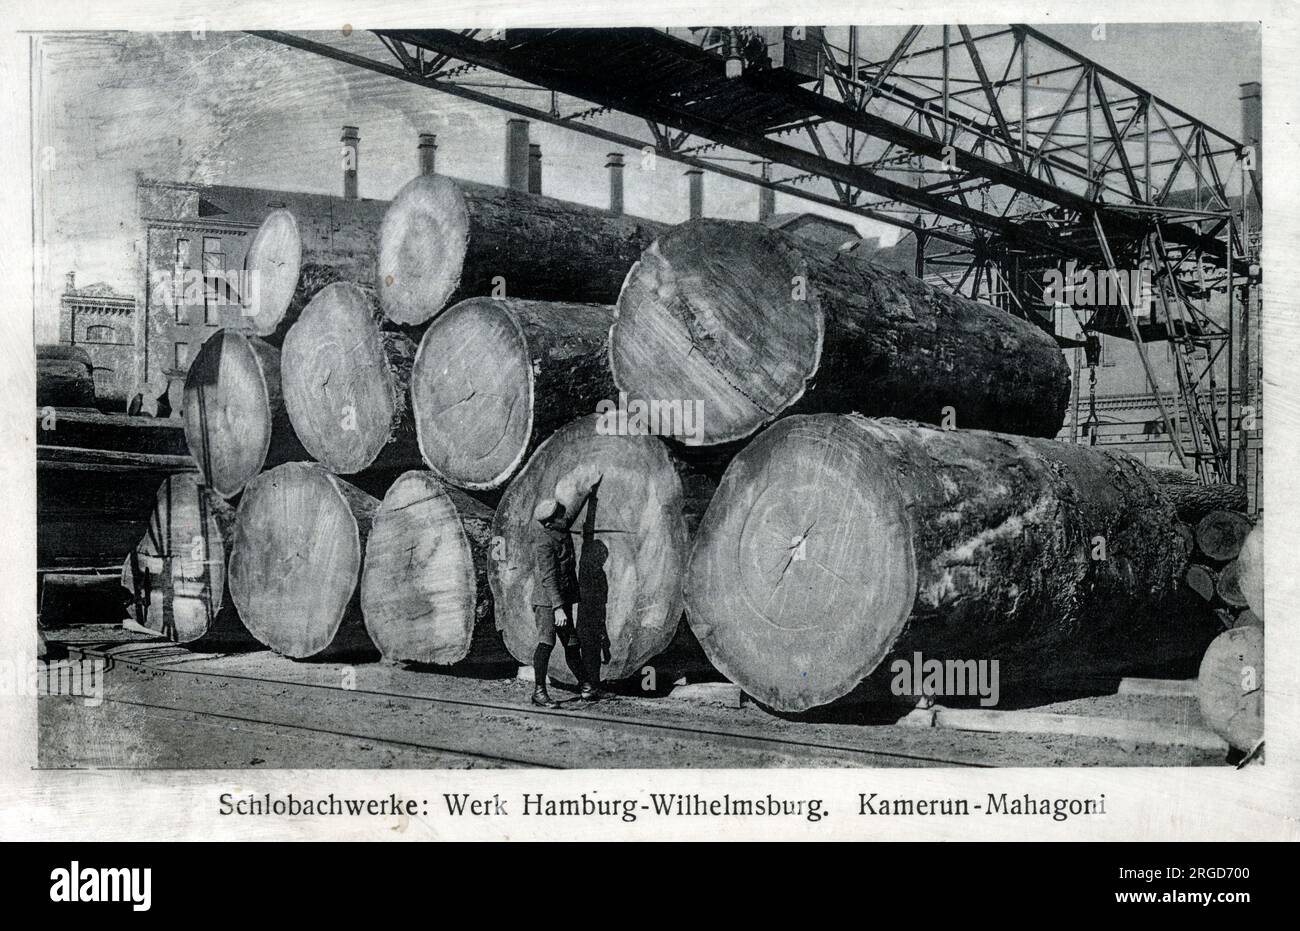 Cut mahogany tree trunks from Cameroon, Africa at Hamburg, Germany. Khaya ivorensis, also called African mahogany or Lagos mahogany, is a tall forest tree with a buttressed trunk in the family Meliaceae. It is found in Angola, Cameroon, Cote d'Ivoire, Gabon, Ghana, Liberia, and Nigeria where it grows primarily in lowland tropical rainforests. Stock Photo